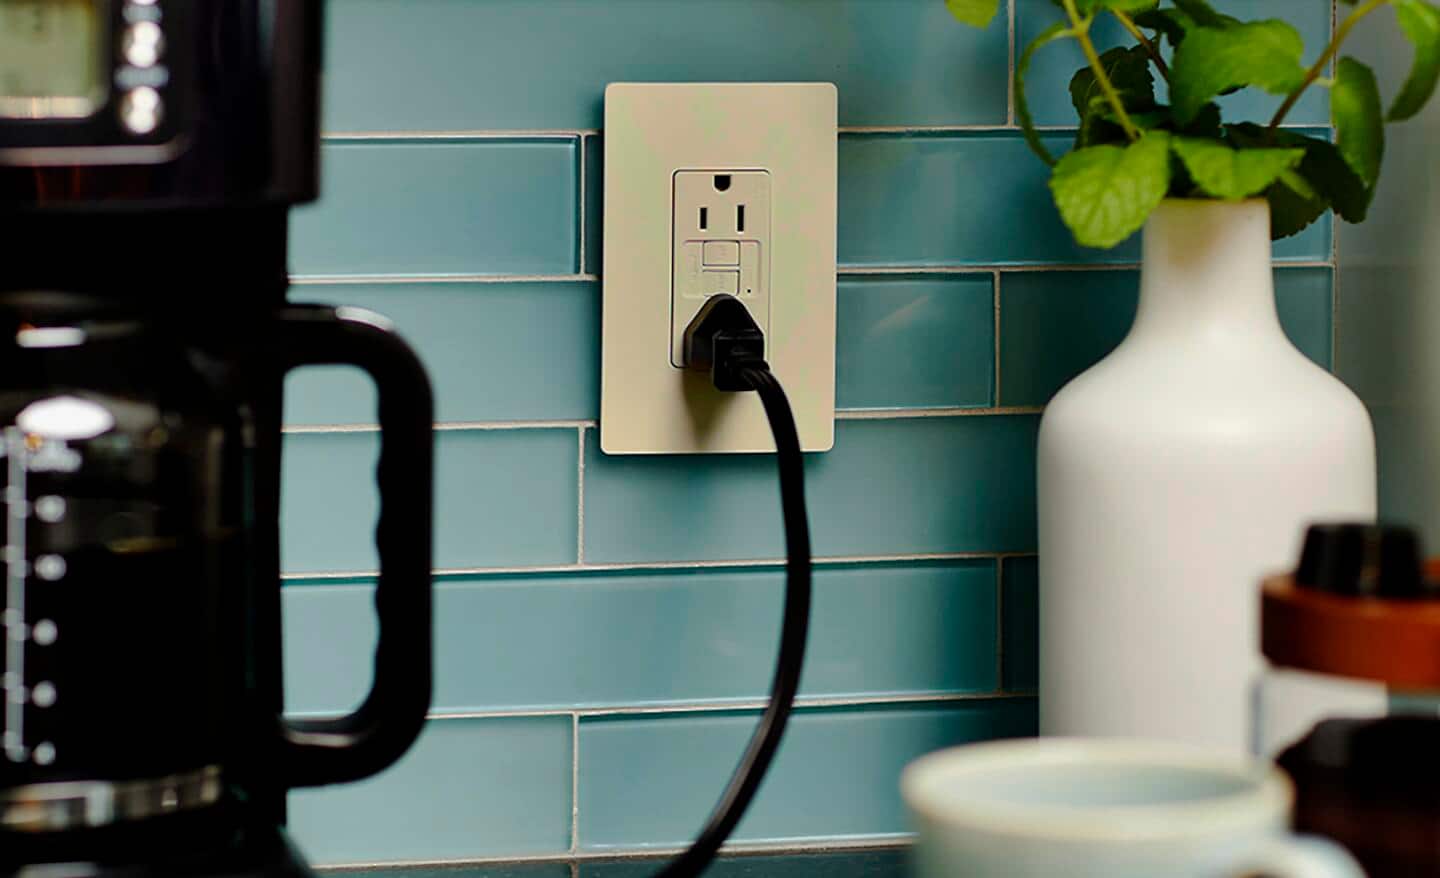 A kitchen appliance plugged into a GFCI outlet.